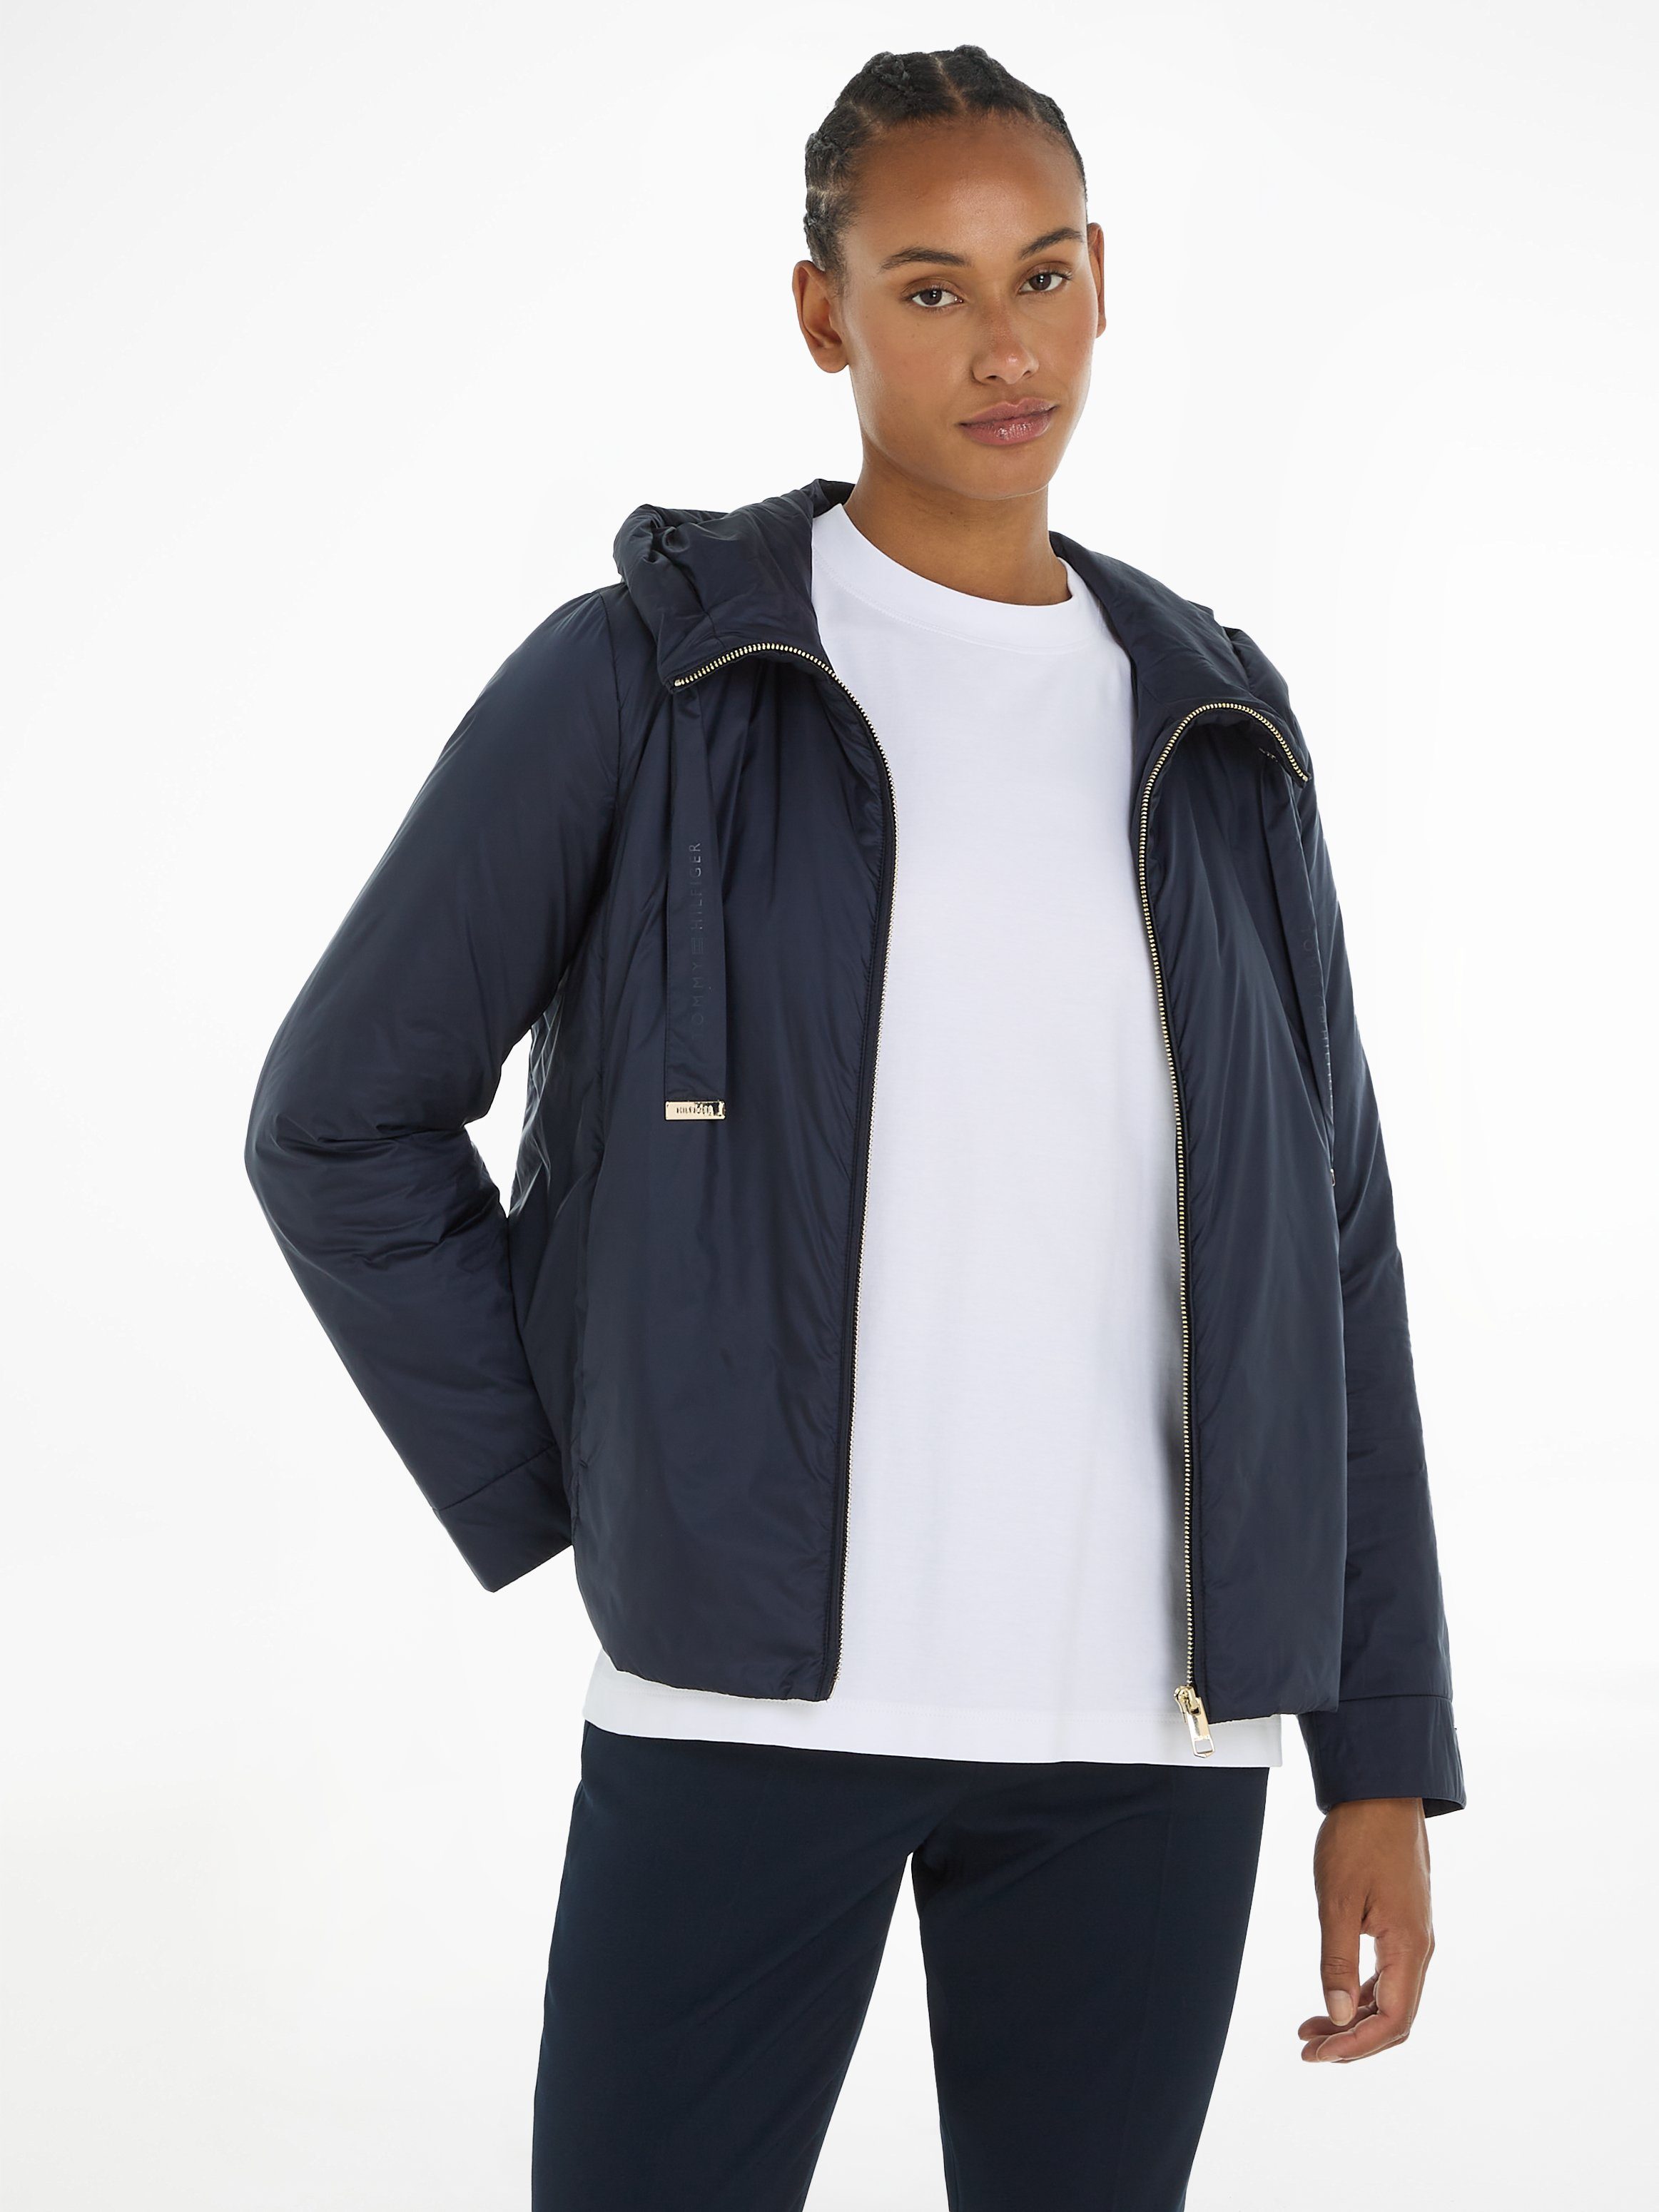 Tommy Hilfiger Outdoorjack in grote maten